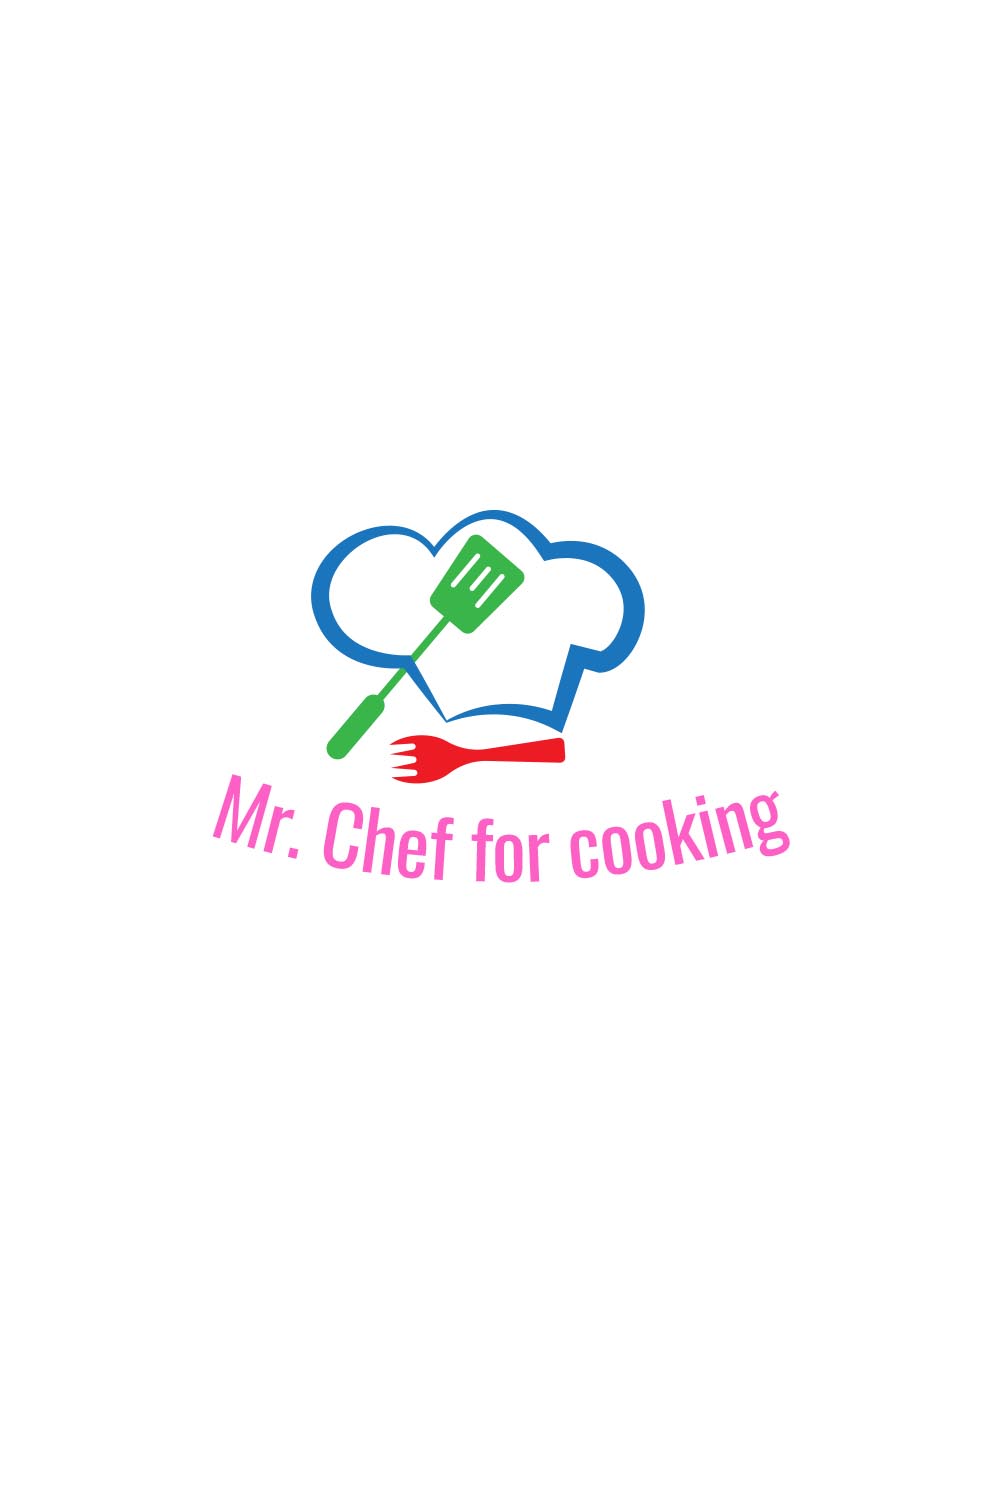 Cooking or restaurant logo pinterest preview image.